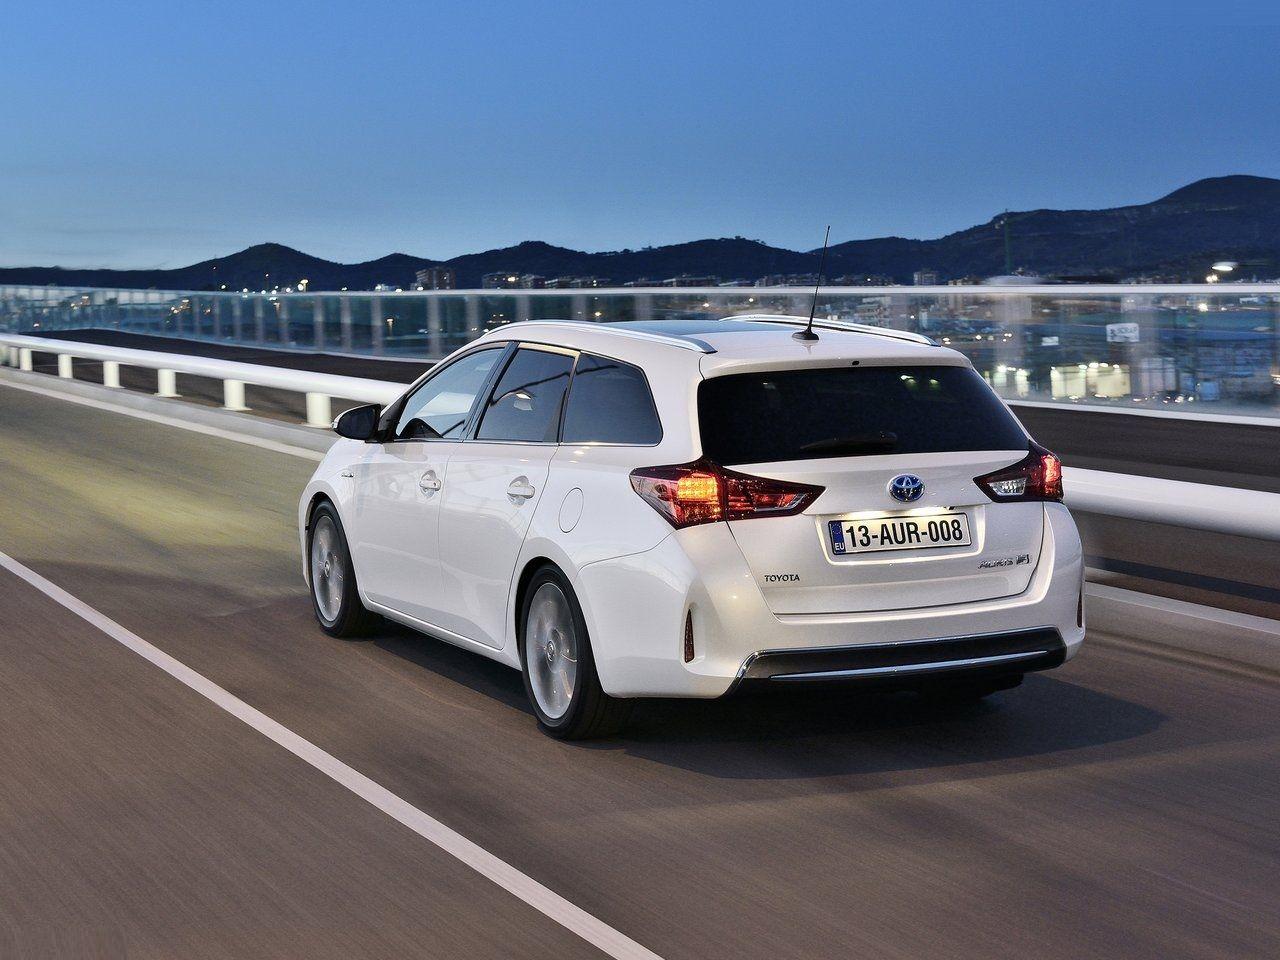 Toyota Auris Touring Sports, Picture, Pics